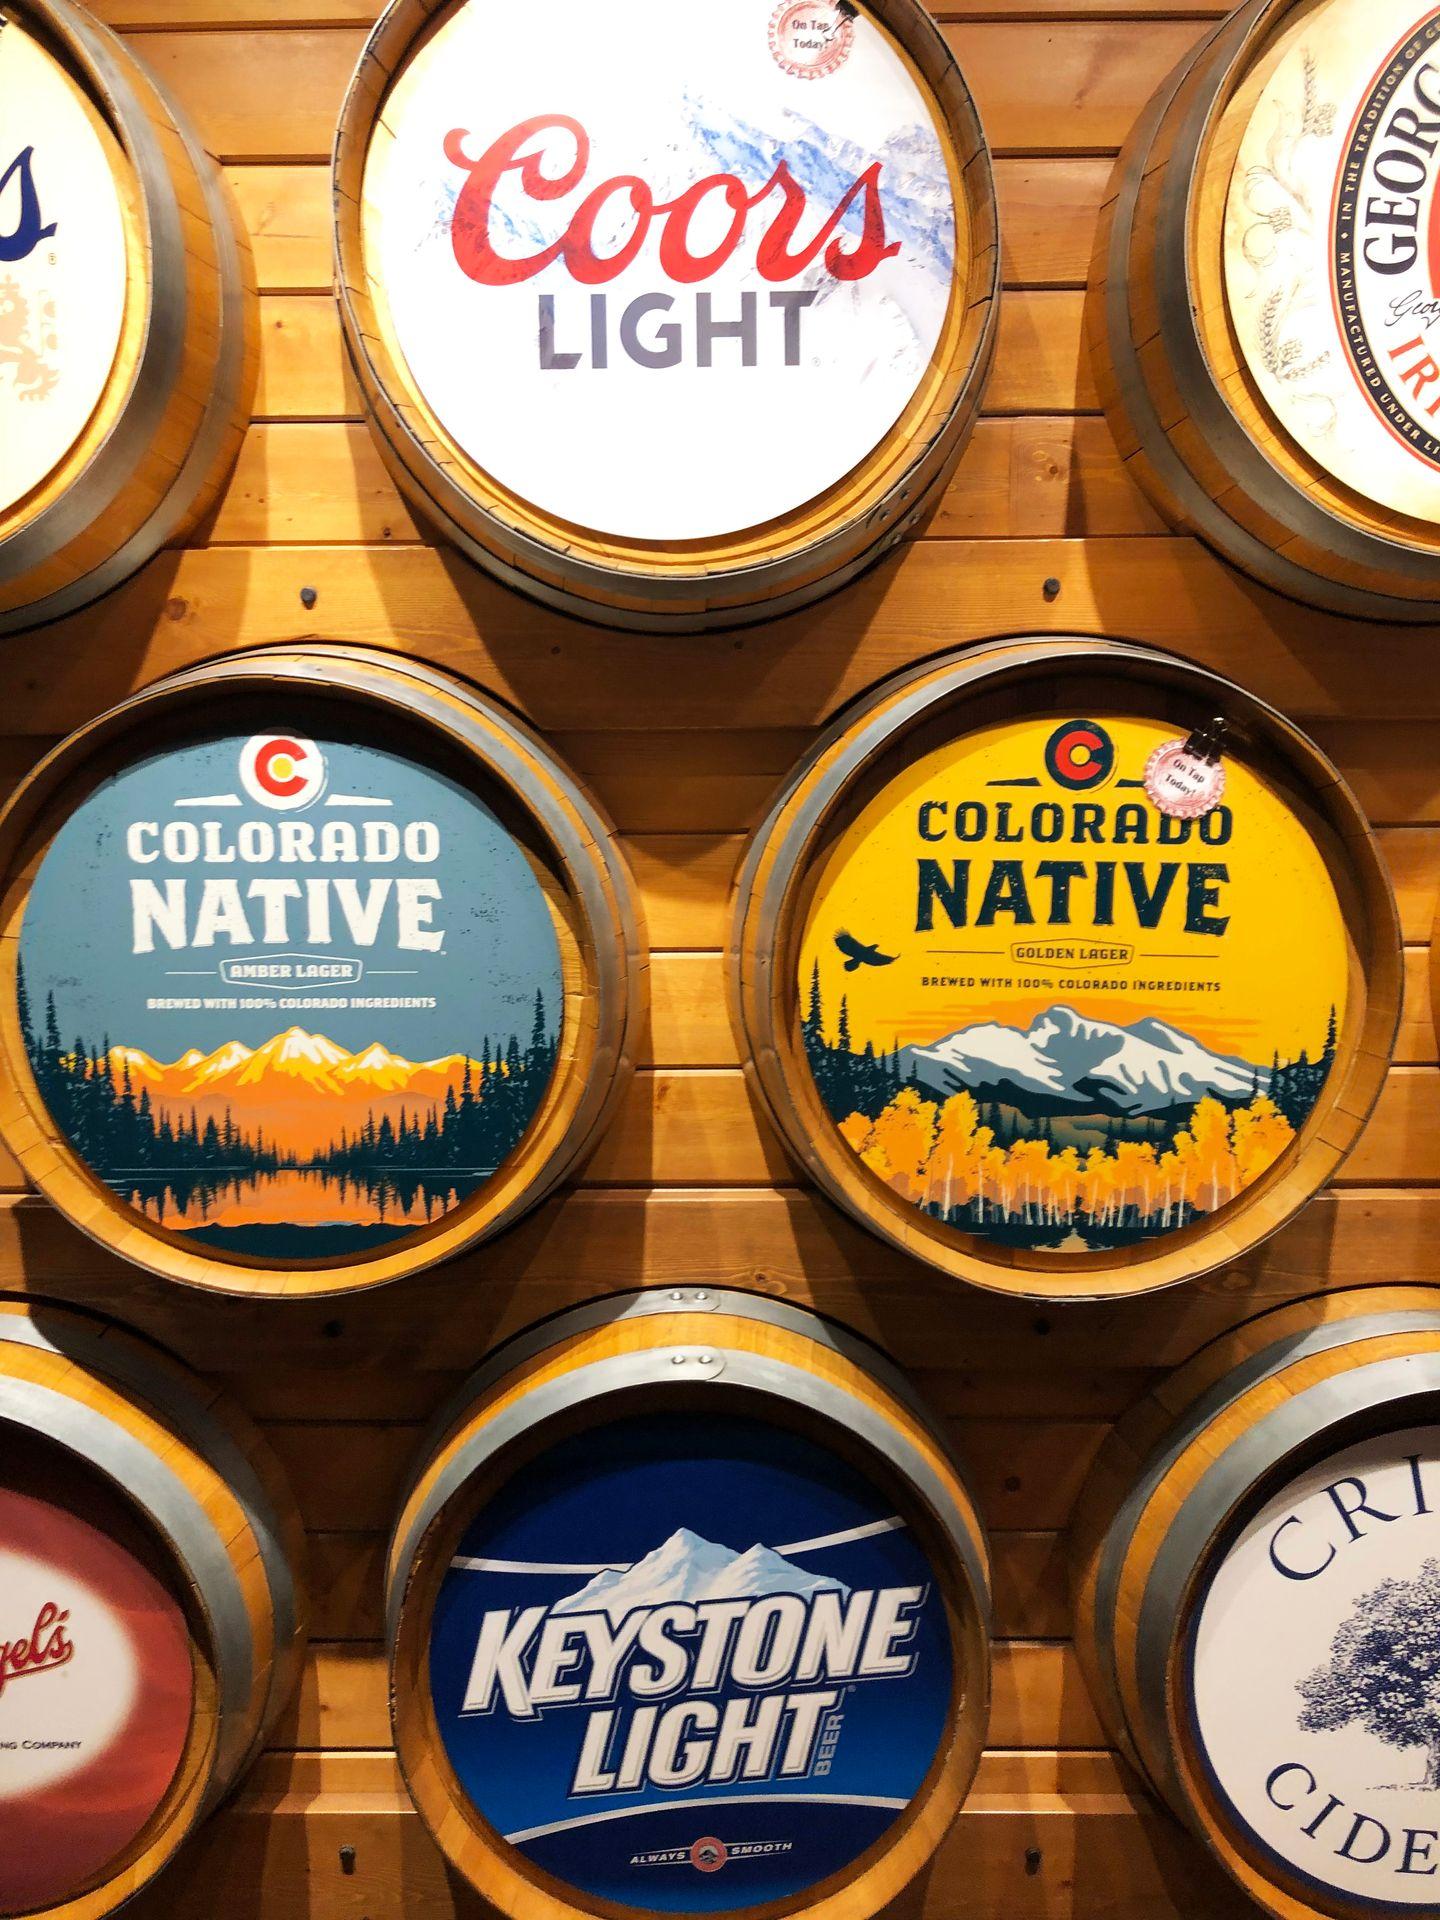 A wall full of barrels at hte Coor's Brewery. The barrels are labeled with different Coor's brands, such as Keystone Light and Colorado Native.